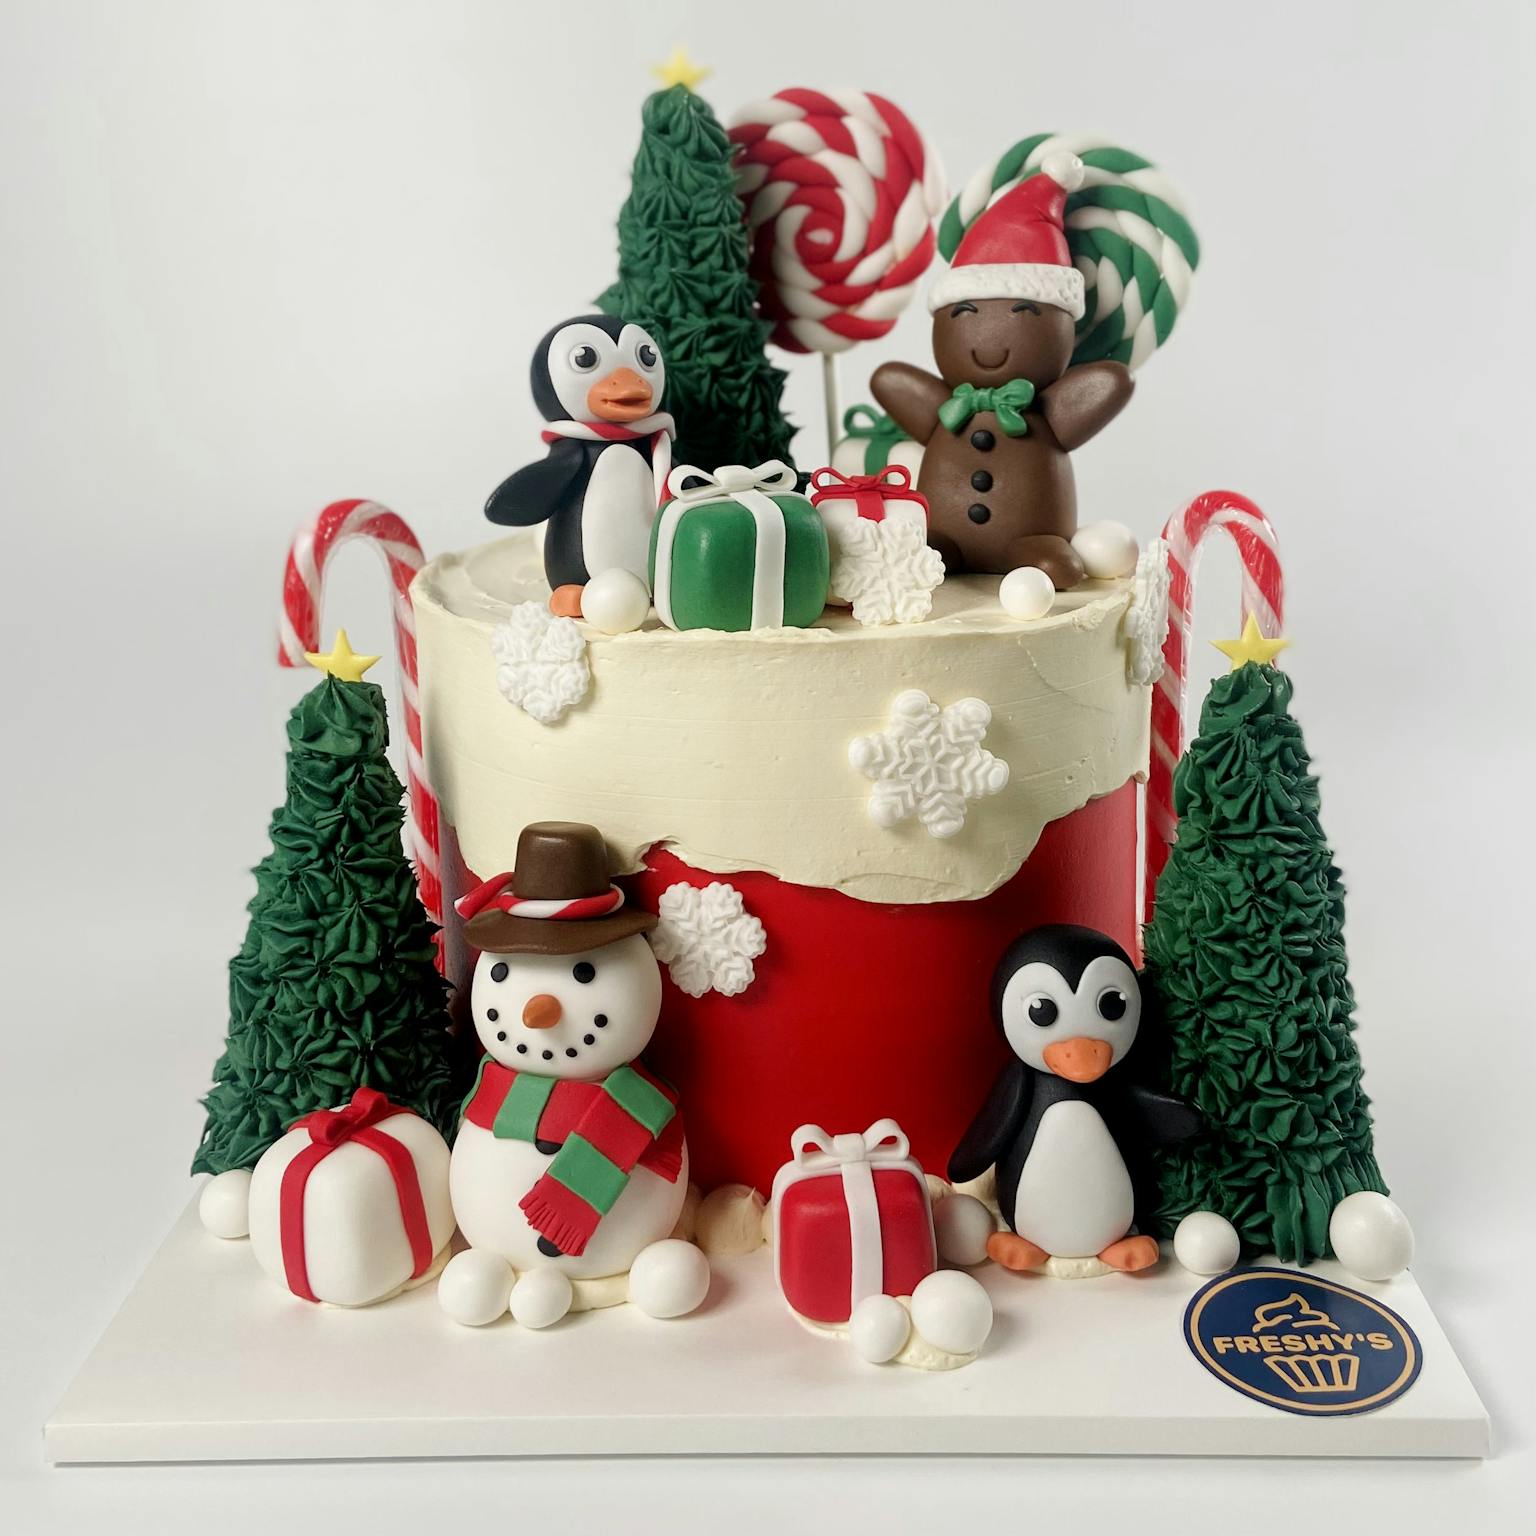 100% edible fondant sculpted Christmas themed cake with pengiuns and snowman